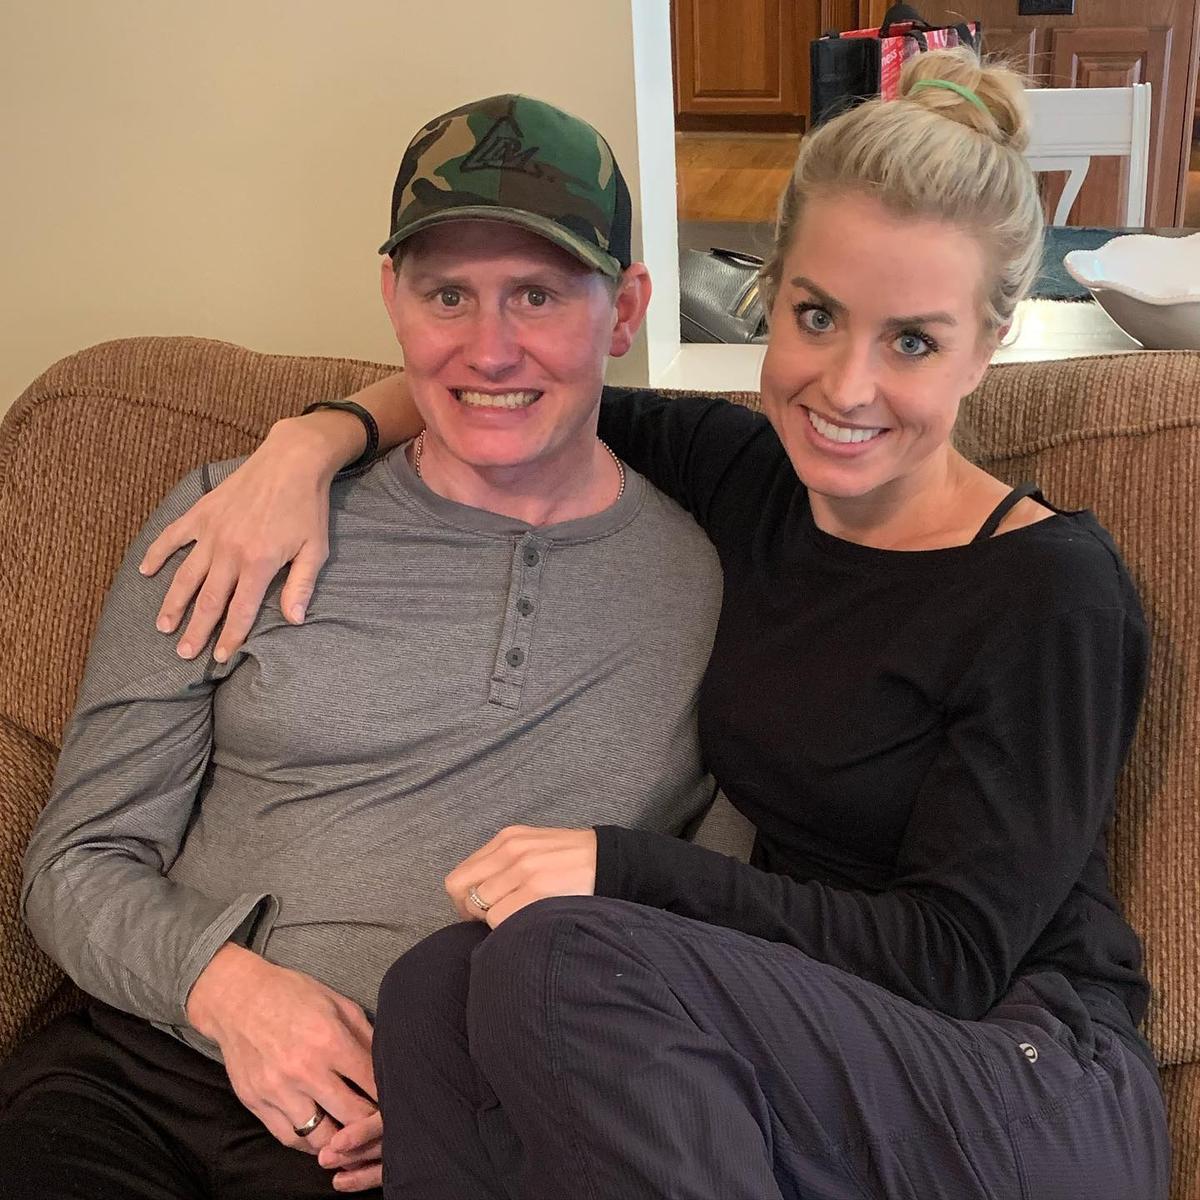 Jon's accident and recovery has made the couple's faith stronger than ever before. (Courtesy of <a href="https://www.instagram.com/laurabpilates/">Laura Browning Grant</a>)